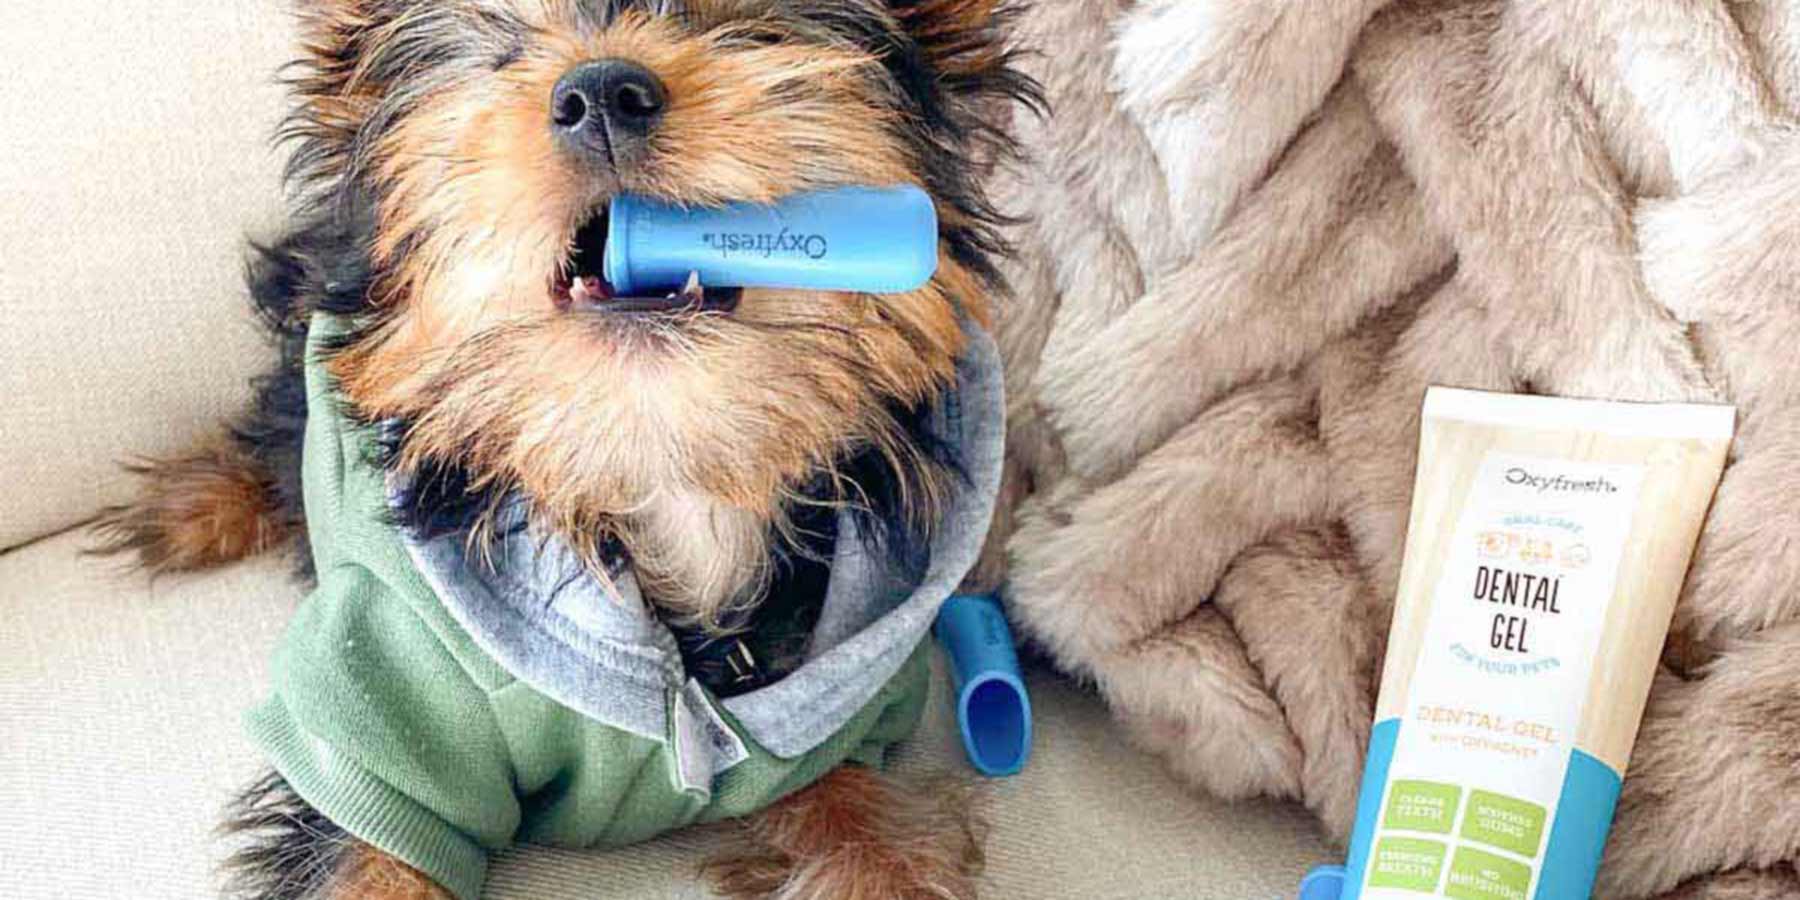 Social-Media-Post-From-Instagram-User-_z_gucci-terrier-chewing-on-dog-finger-toothbrush-with-oxyfresh-pet-dental-gel-toothpaste-for-dogs-bad-breath